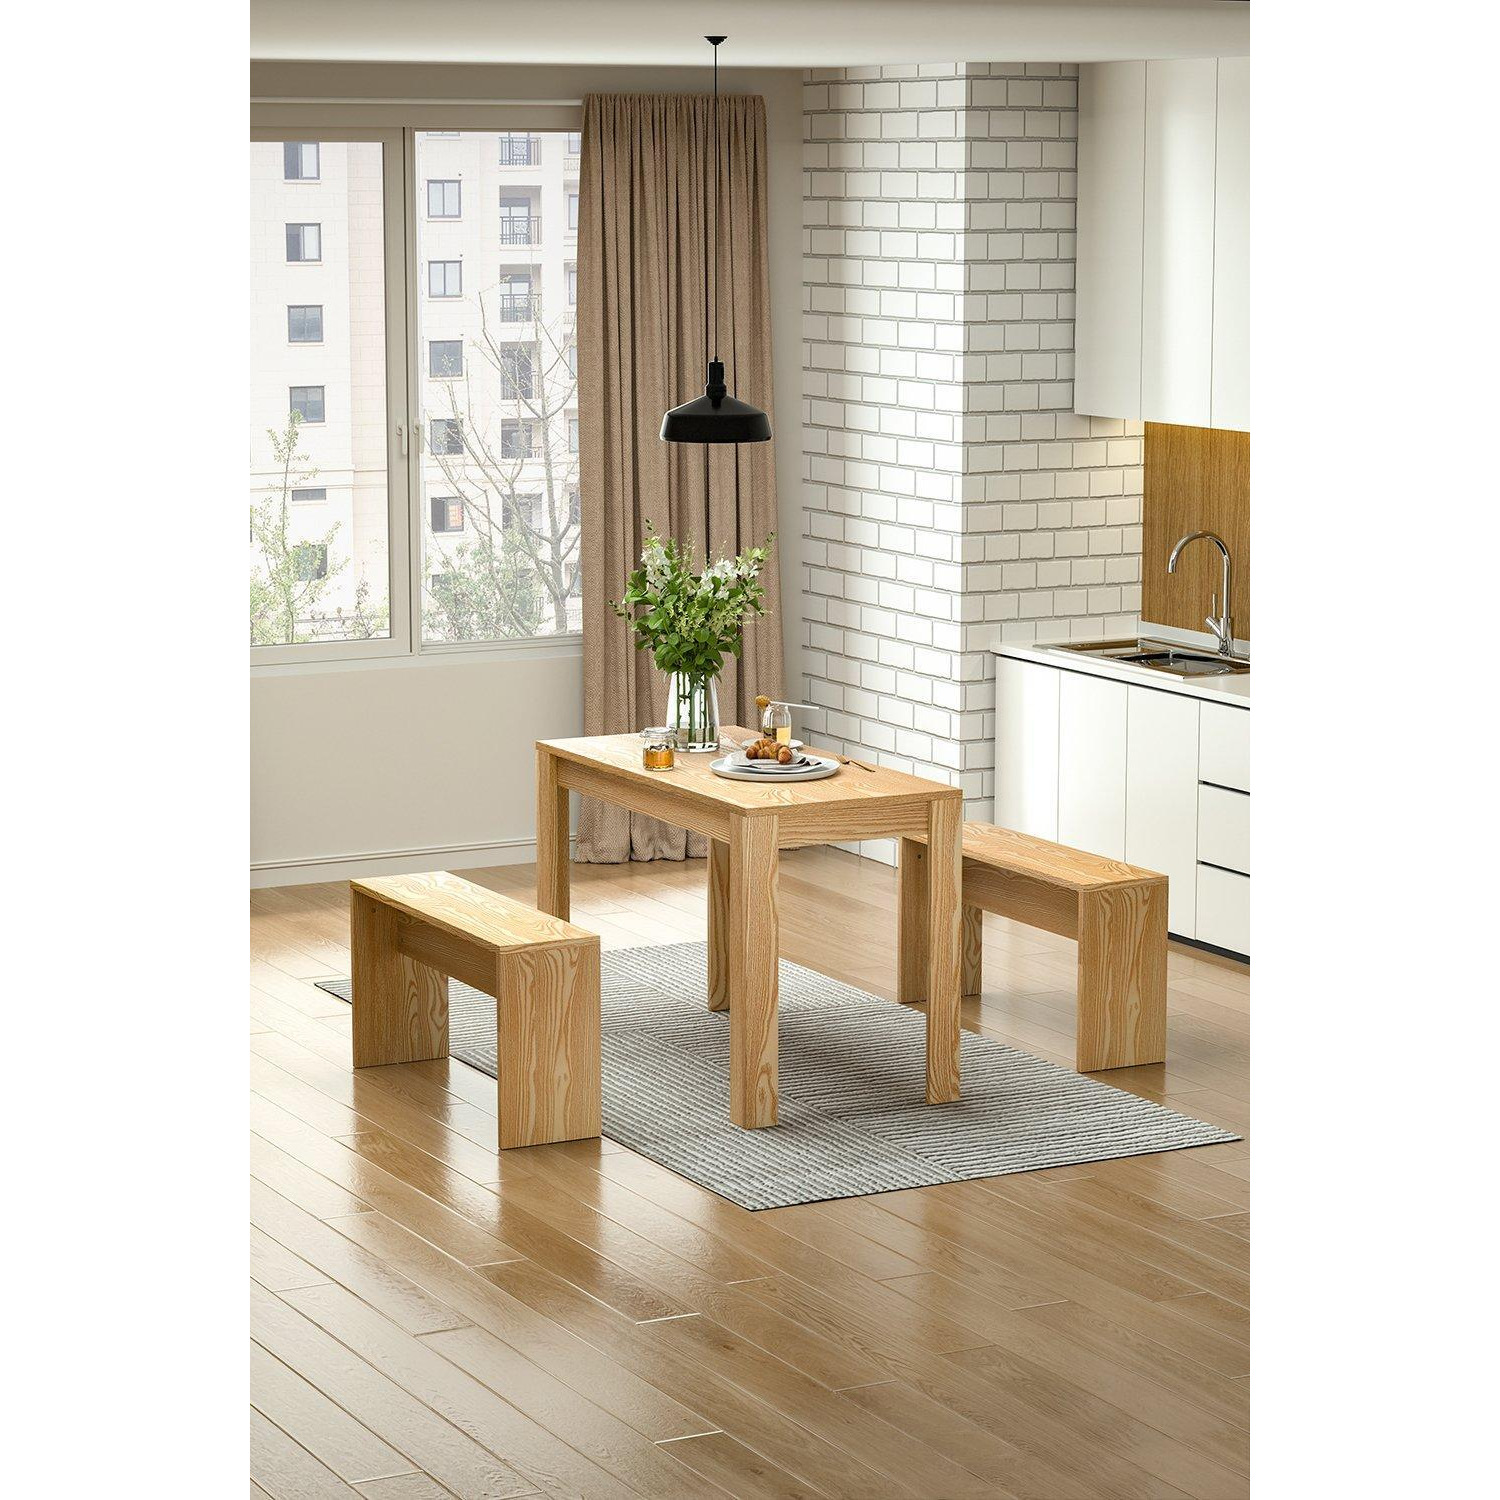 3Pcs Wooden Dining Room Table and Benches - image 1